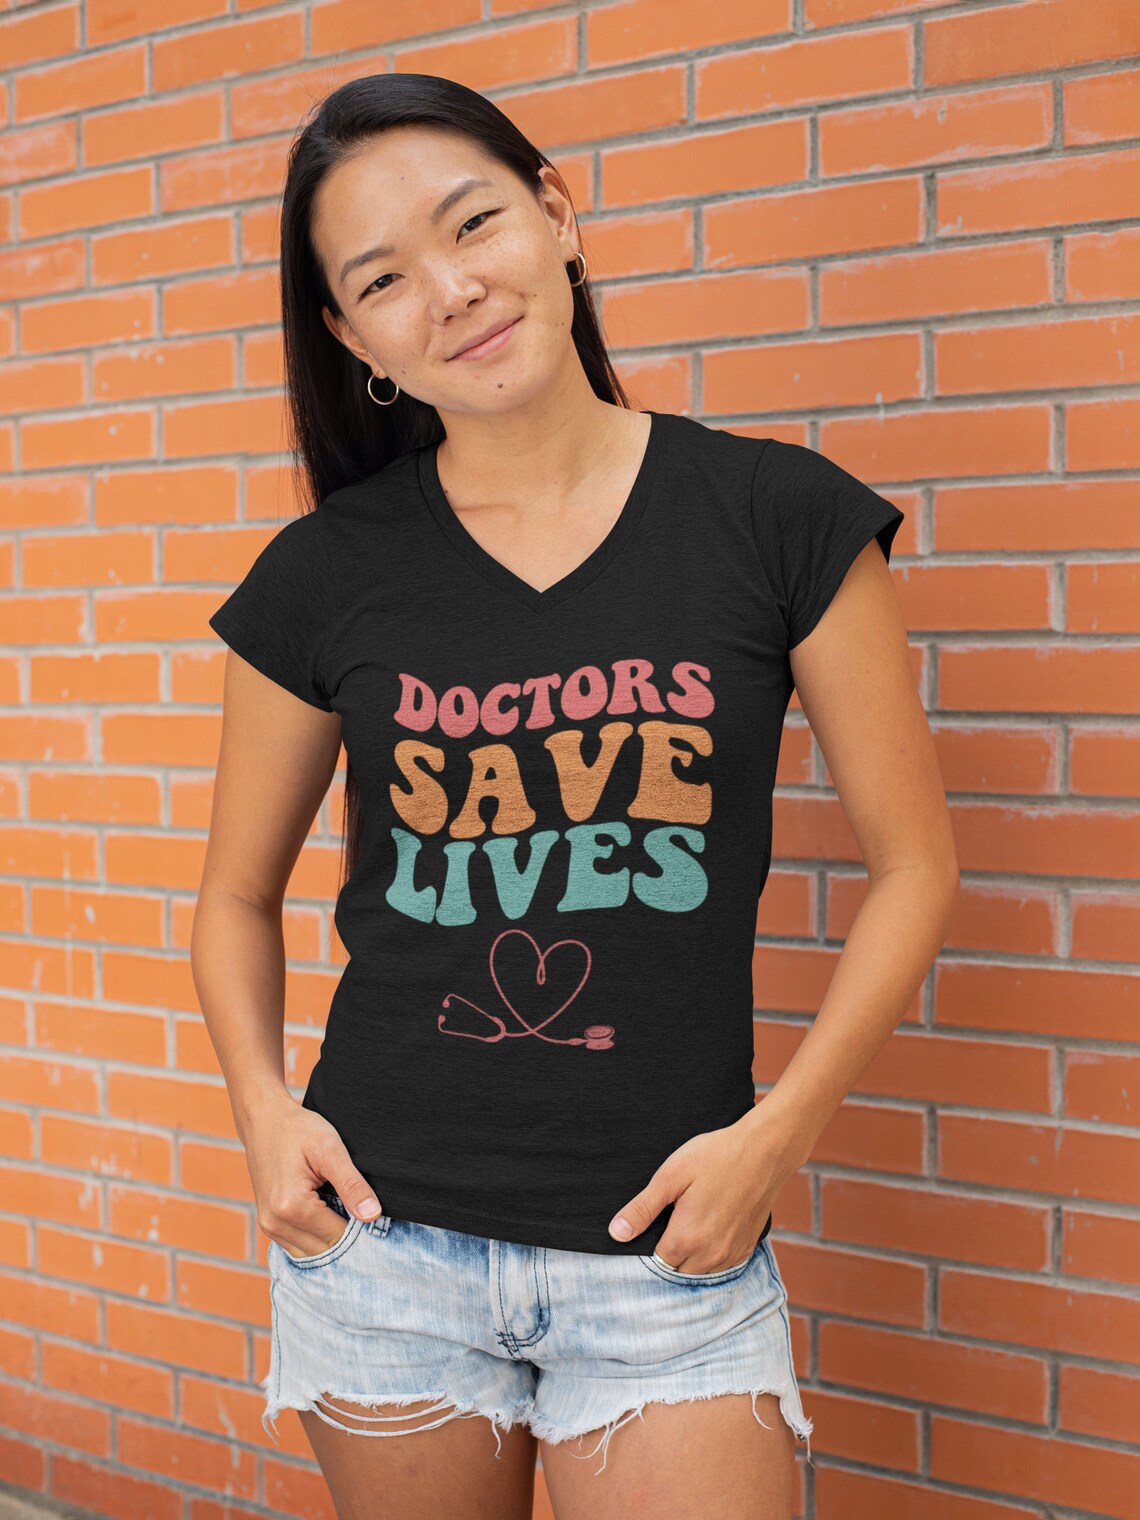 Doctors Save Lives Women's Short Sleeve V-Neck Tee, Doctor shirts, Doctor gift ideas, gift for doctors, women shirt with doctor design